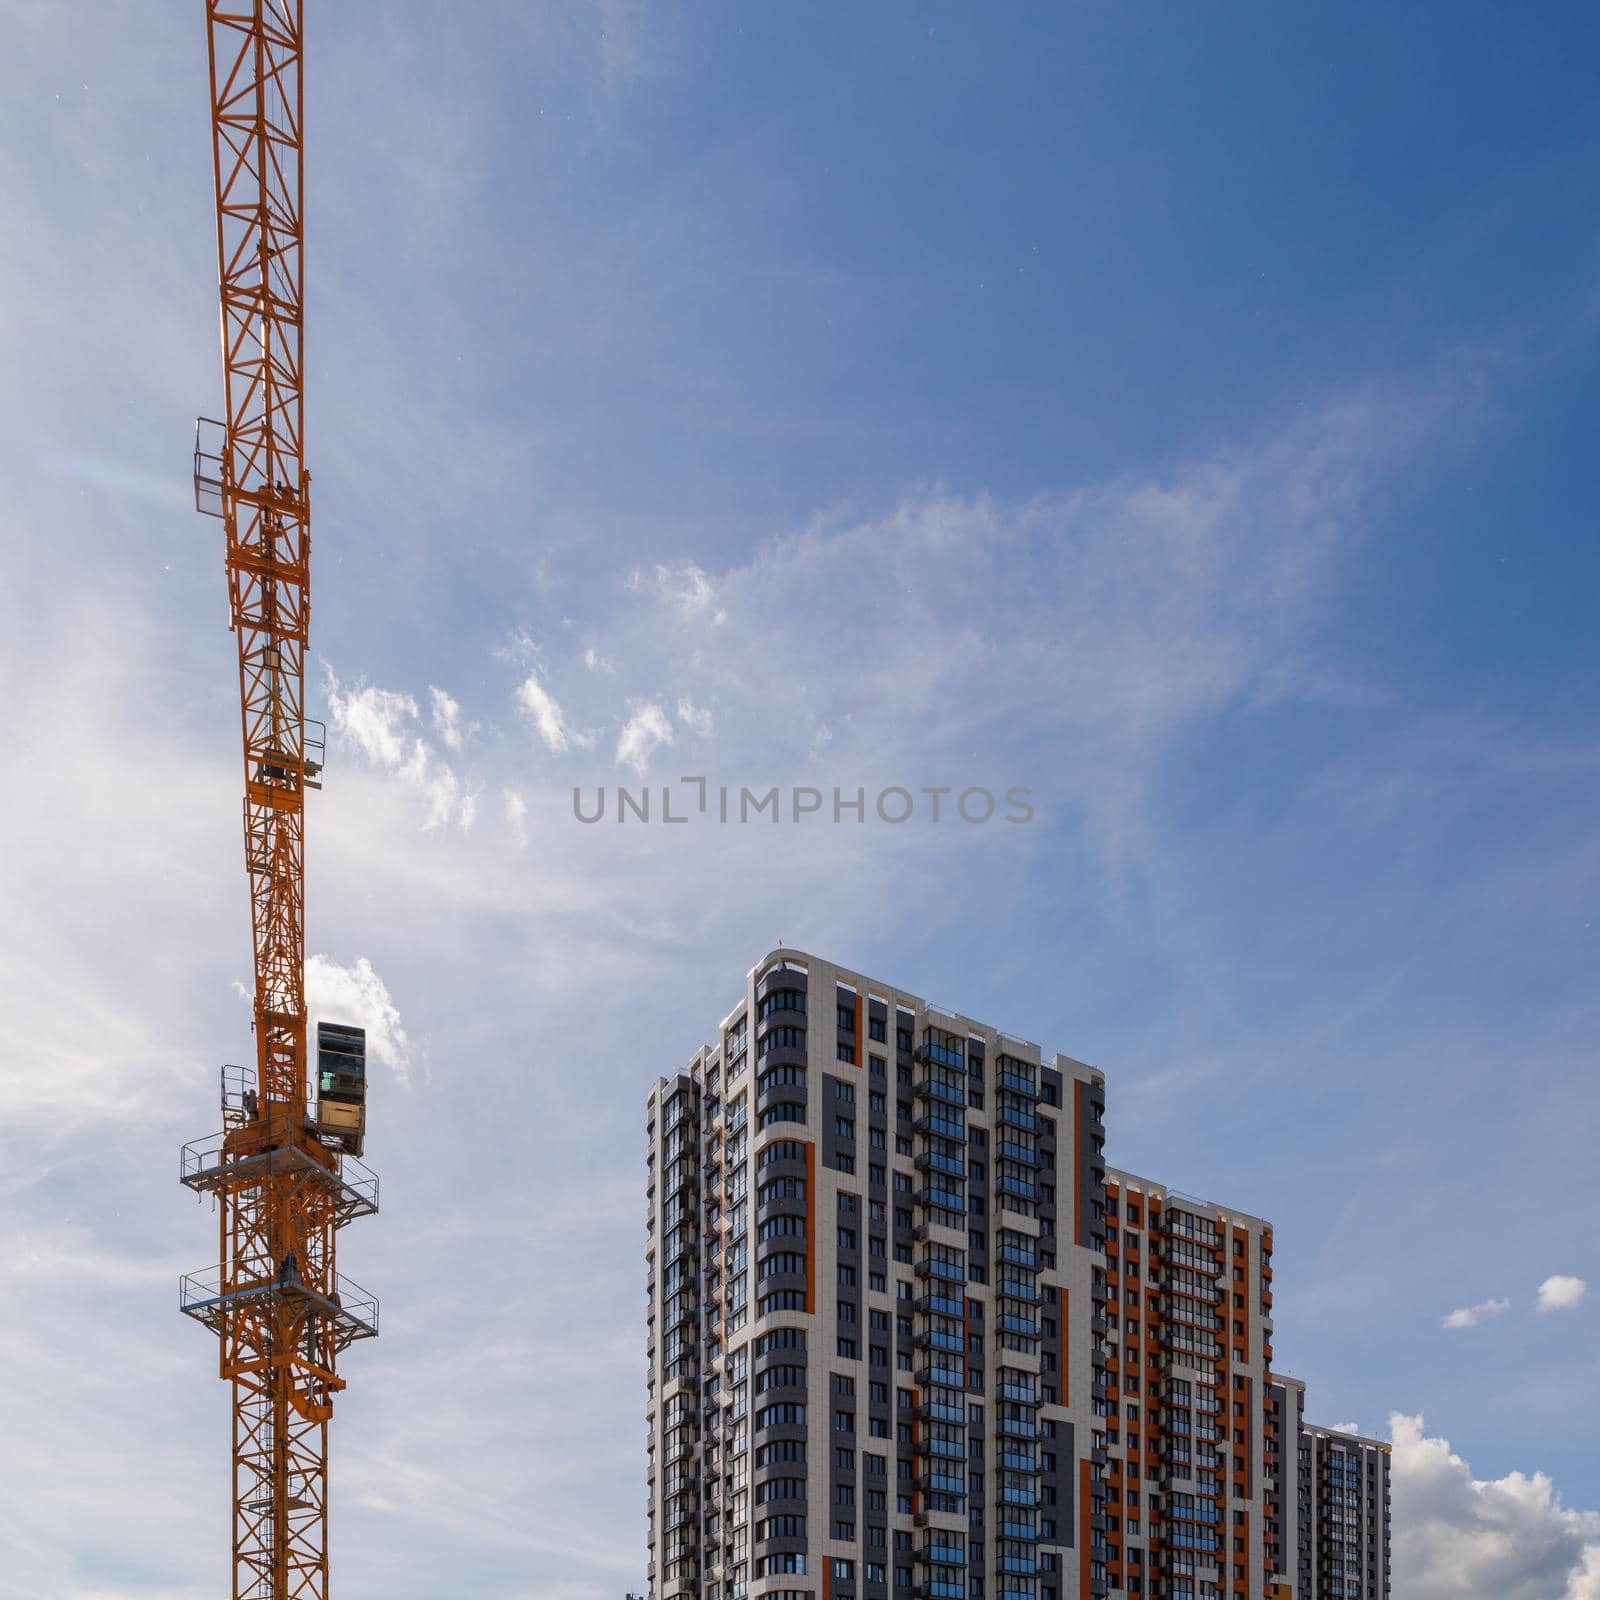 freshly built high rise apartment building near yellow crane on blue sky background with thin feathery clouds.